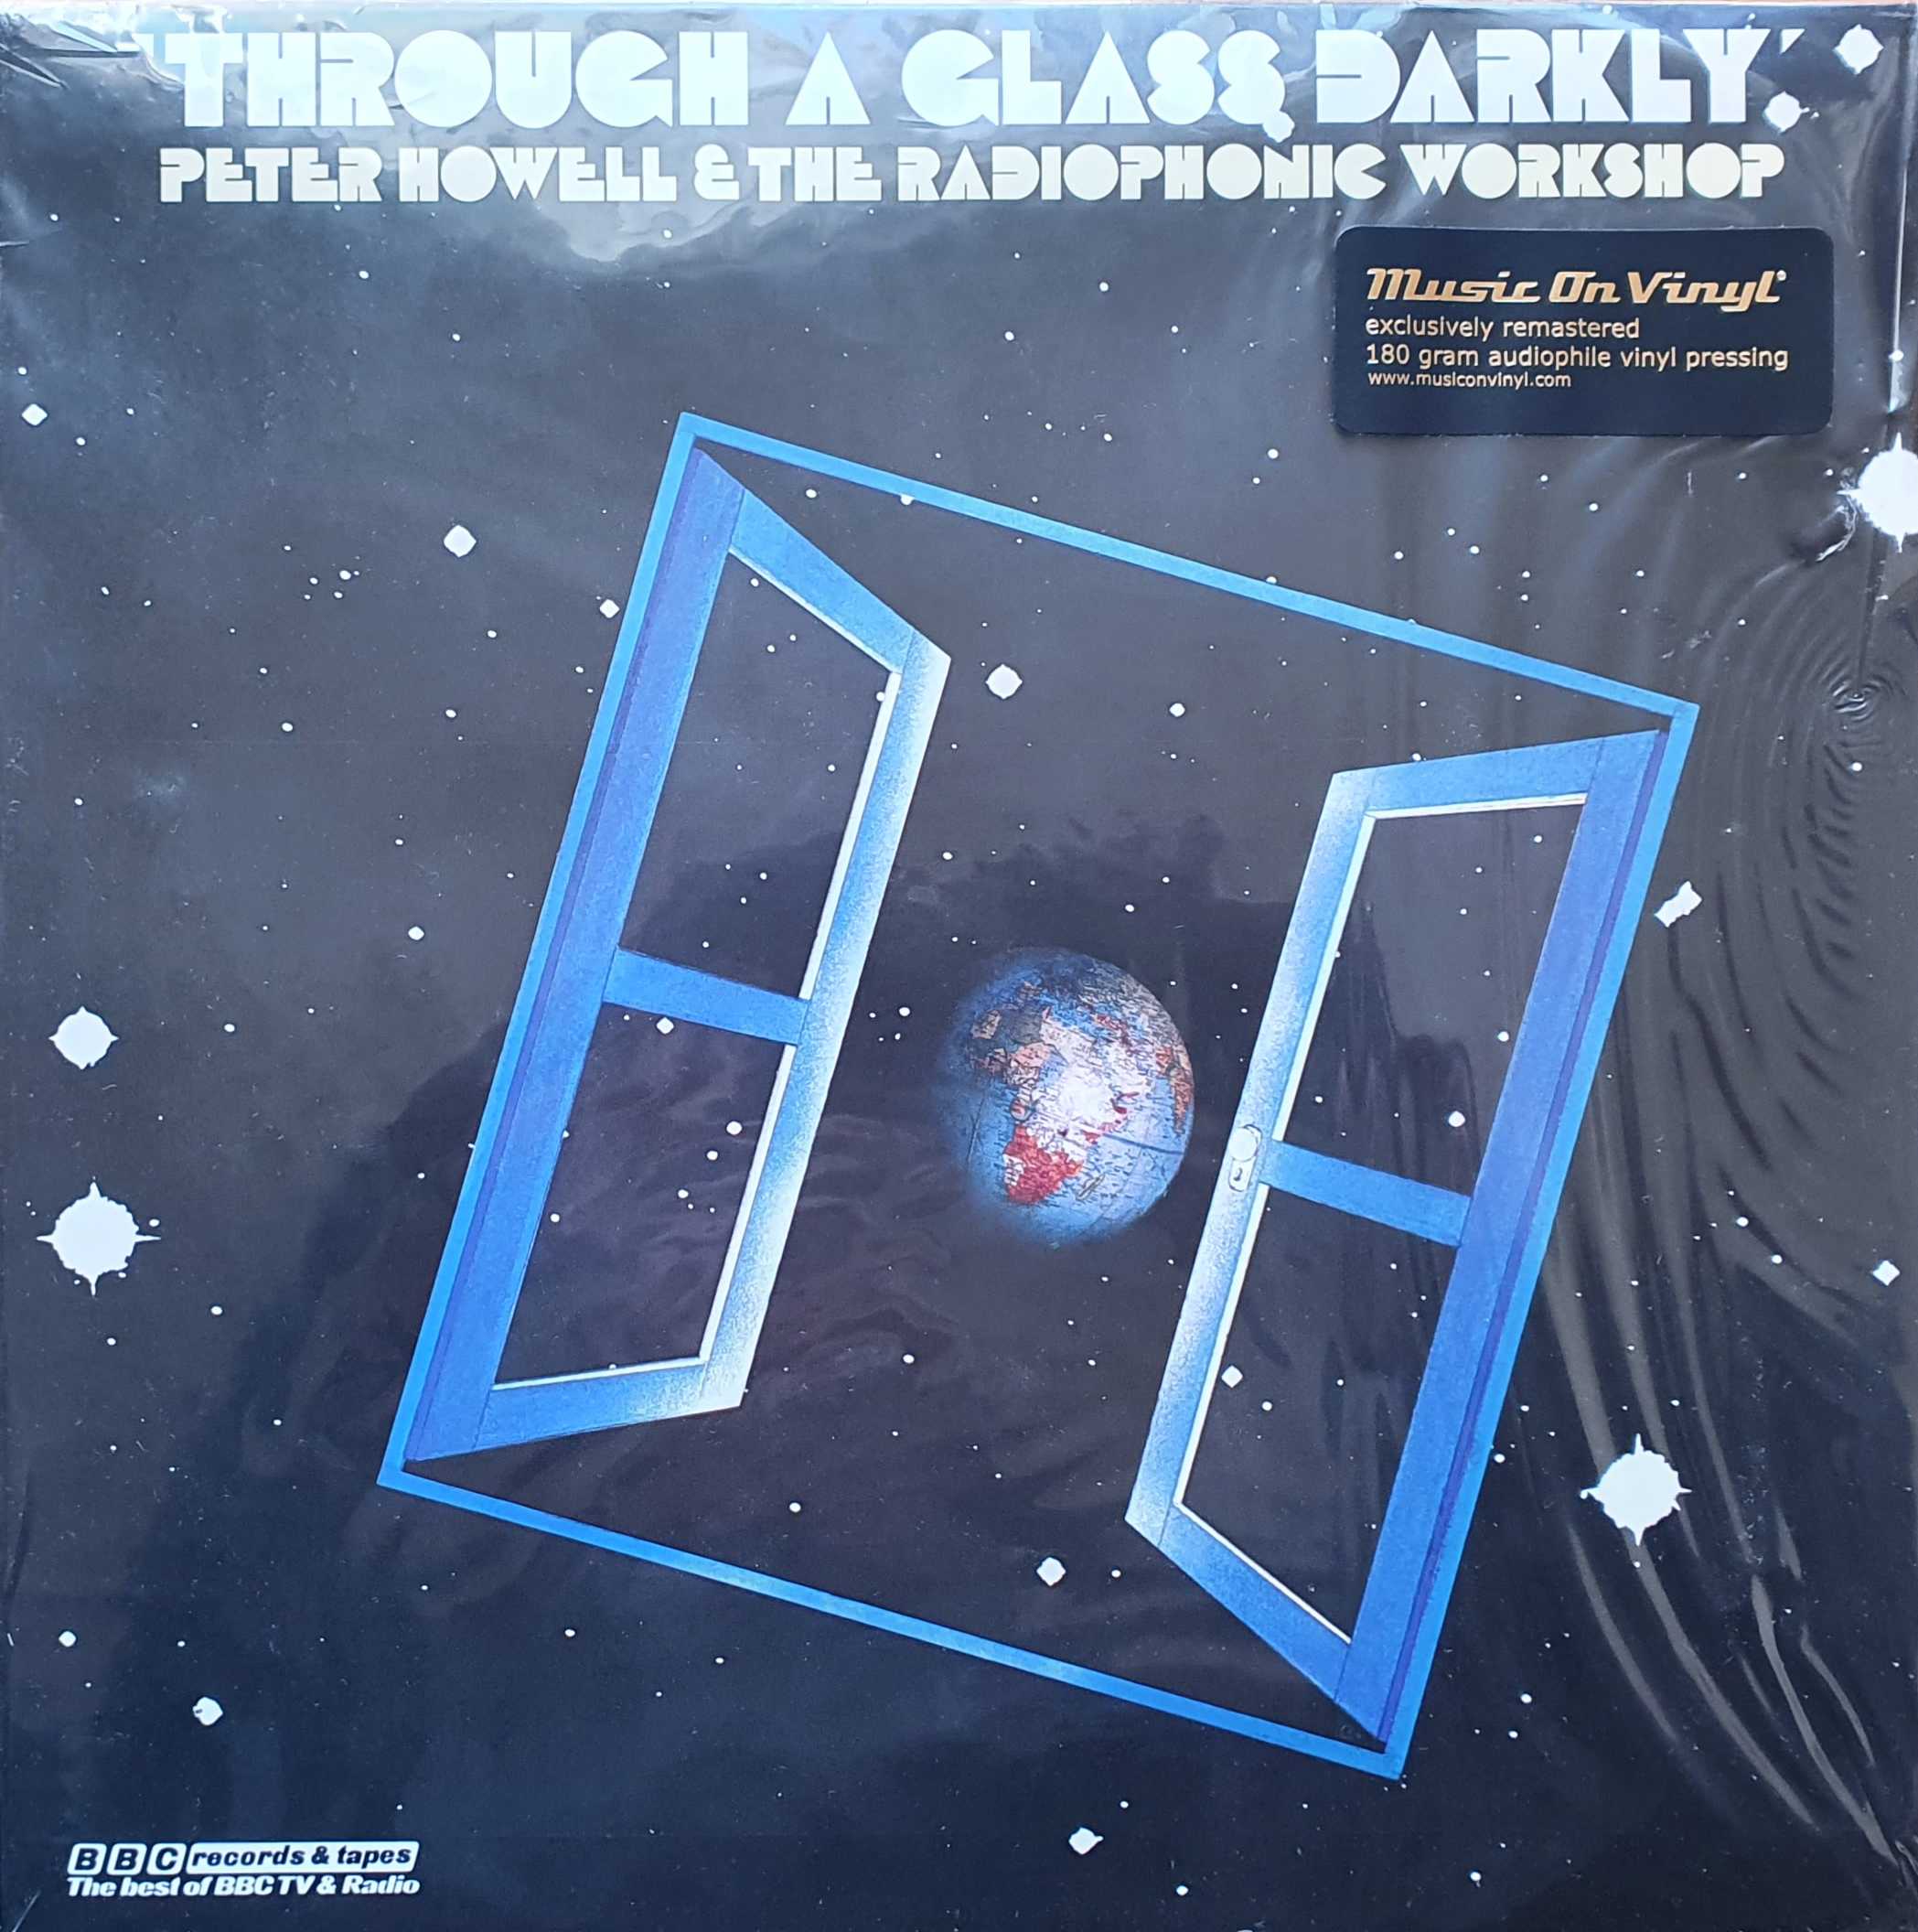 Picture of Through a glass darkly by artist Peter Howell / BBC Radiophonic Workshop from the BBC albums - Records and Tapes library